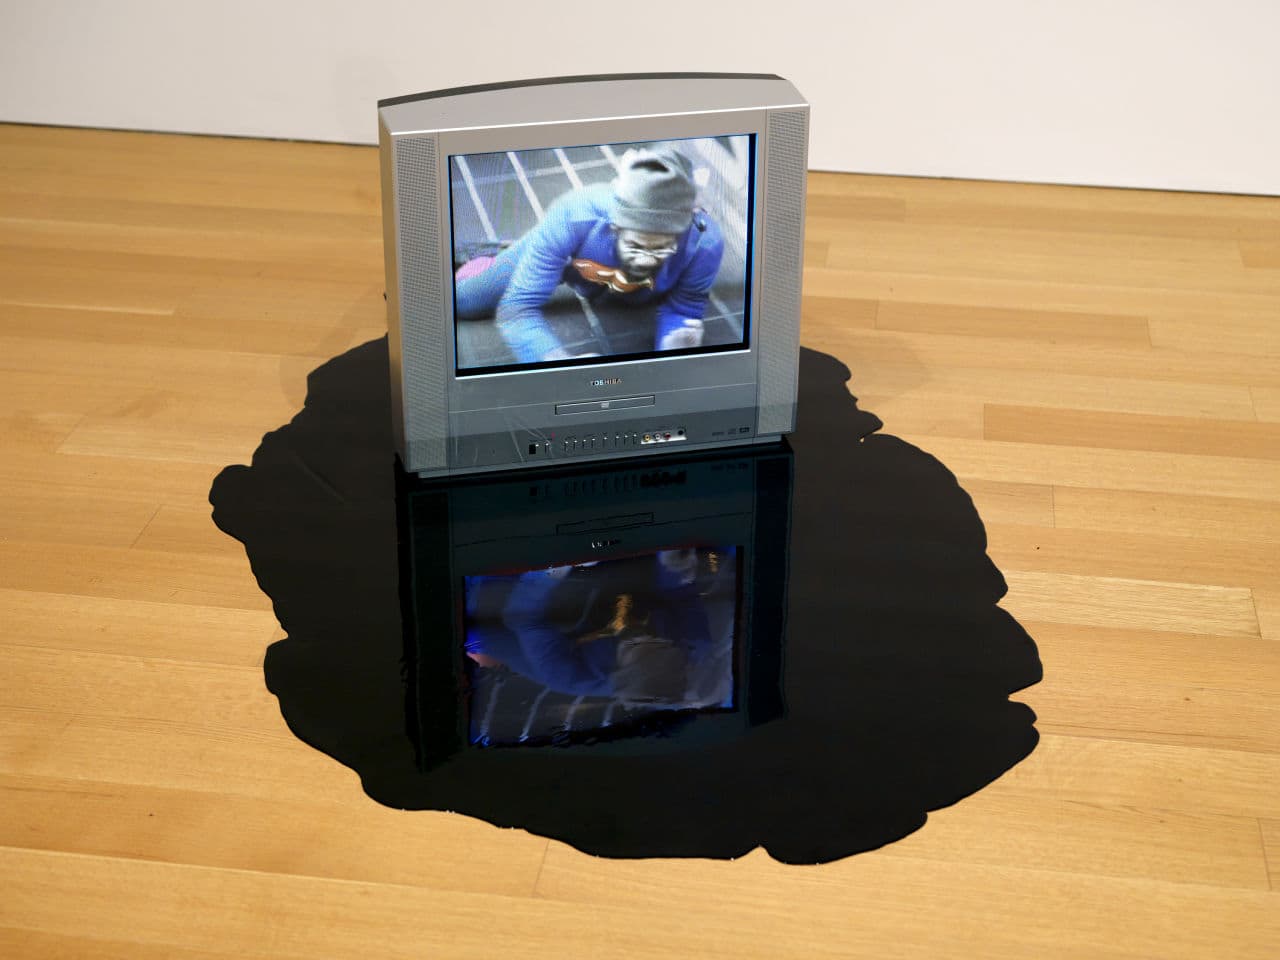 In an exhibit at the deCordova, artist William Pope L. is seen inside a television showing him crawling the 22 miles of New York's Broadway in his project called "The Great White Way." (Courtesy of the artist and Mitchell-Innes & Nash; Photo by Clements Photography and Design in Boston)